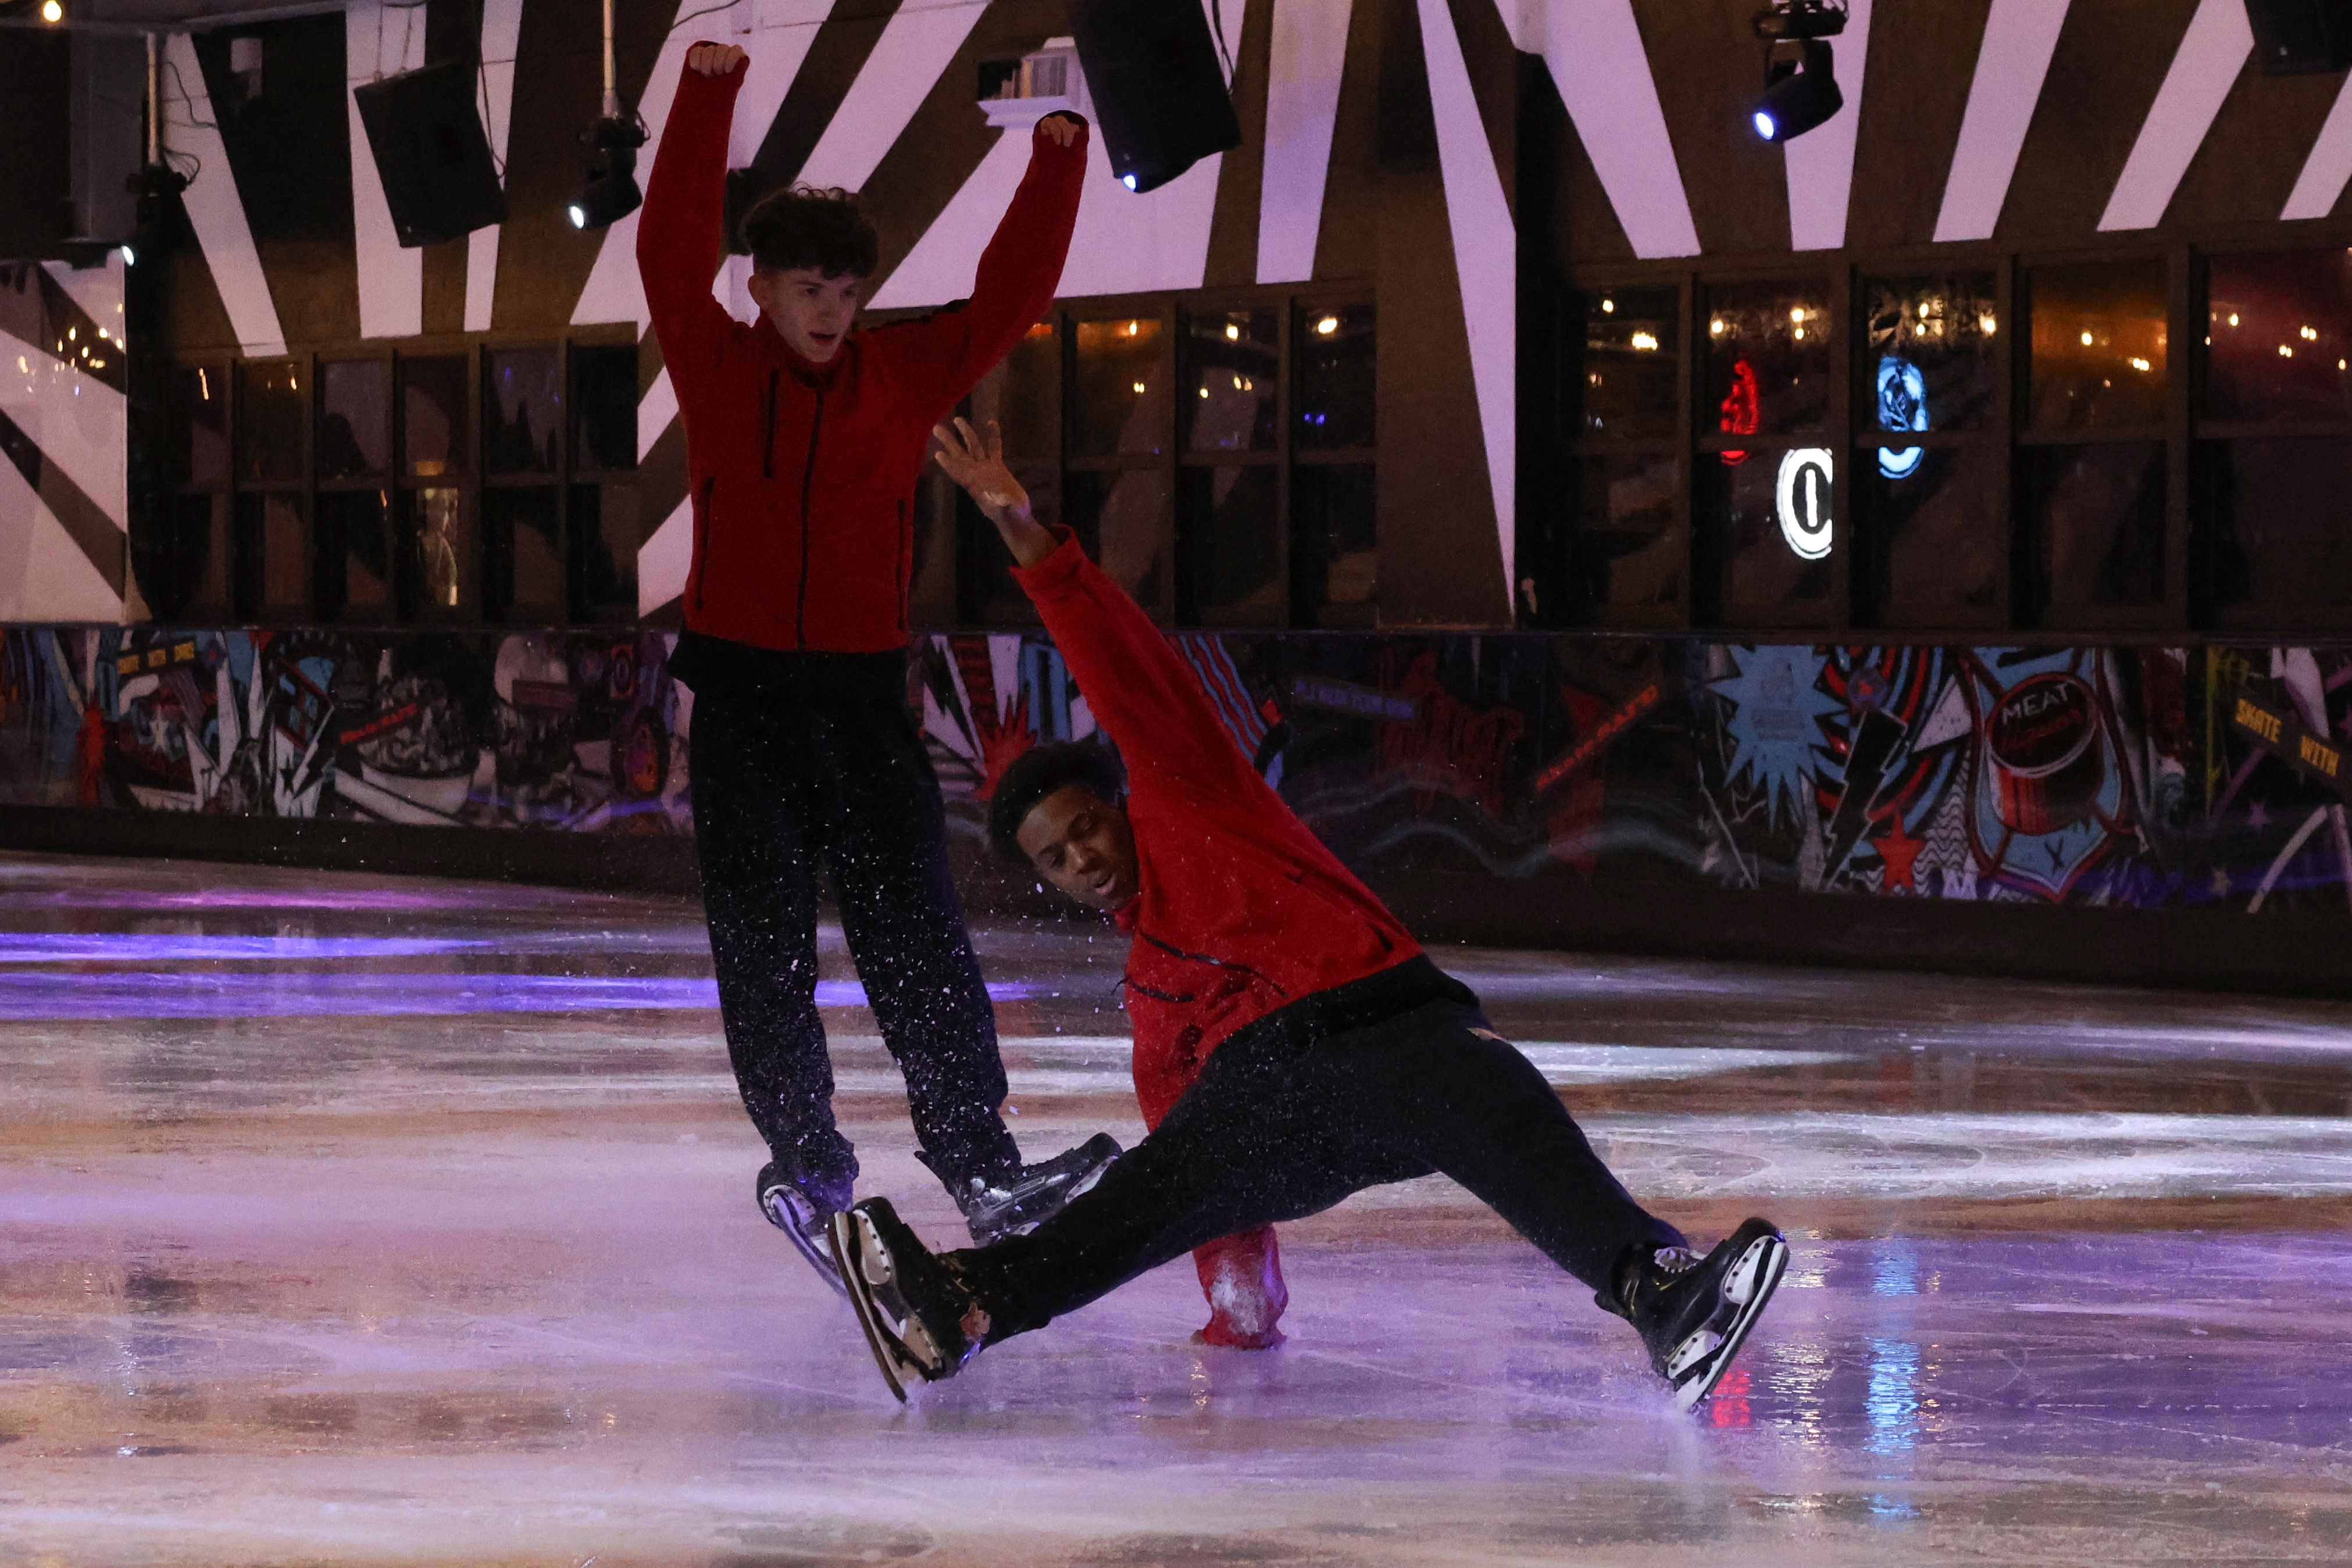 Two ice skaters performing a routine